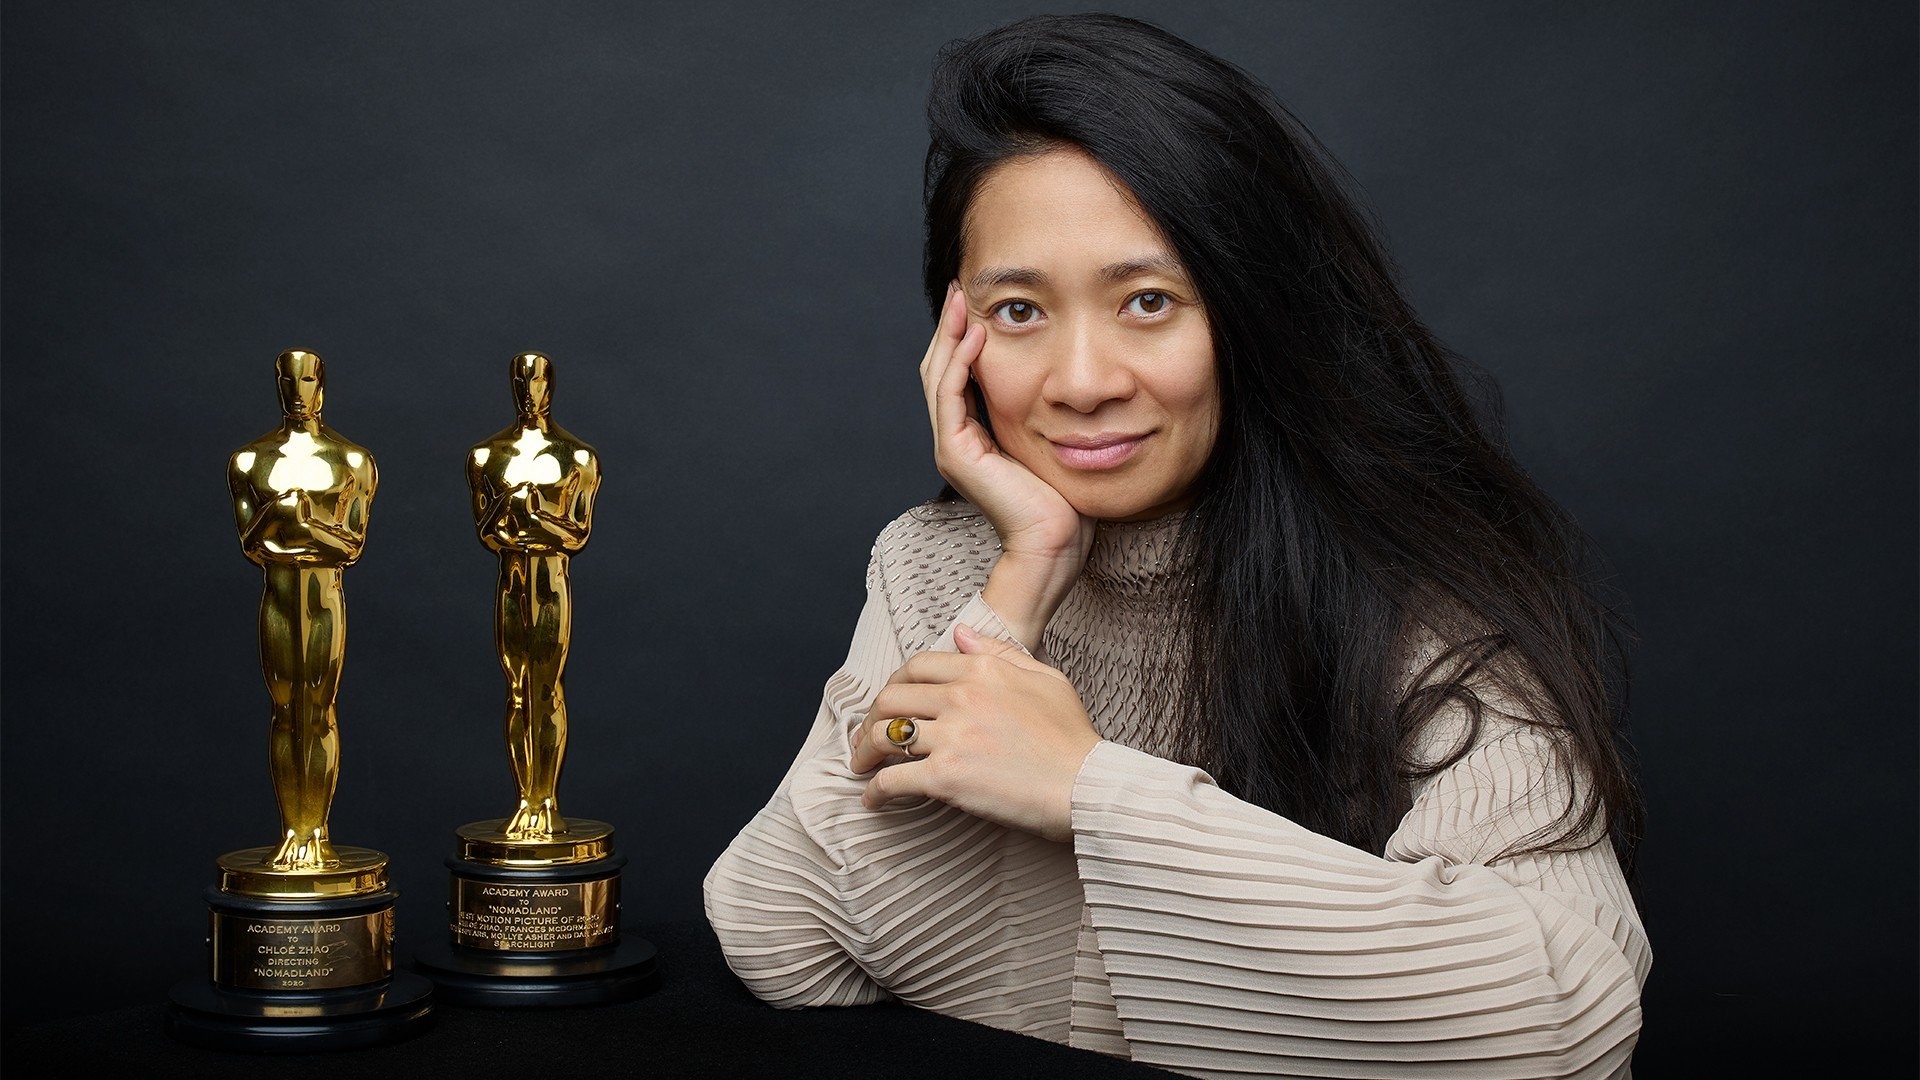 chloe-zhao-variety-day-after-the-oscars-cover-story-1-16x9-1.jpg